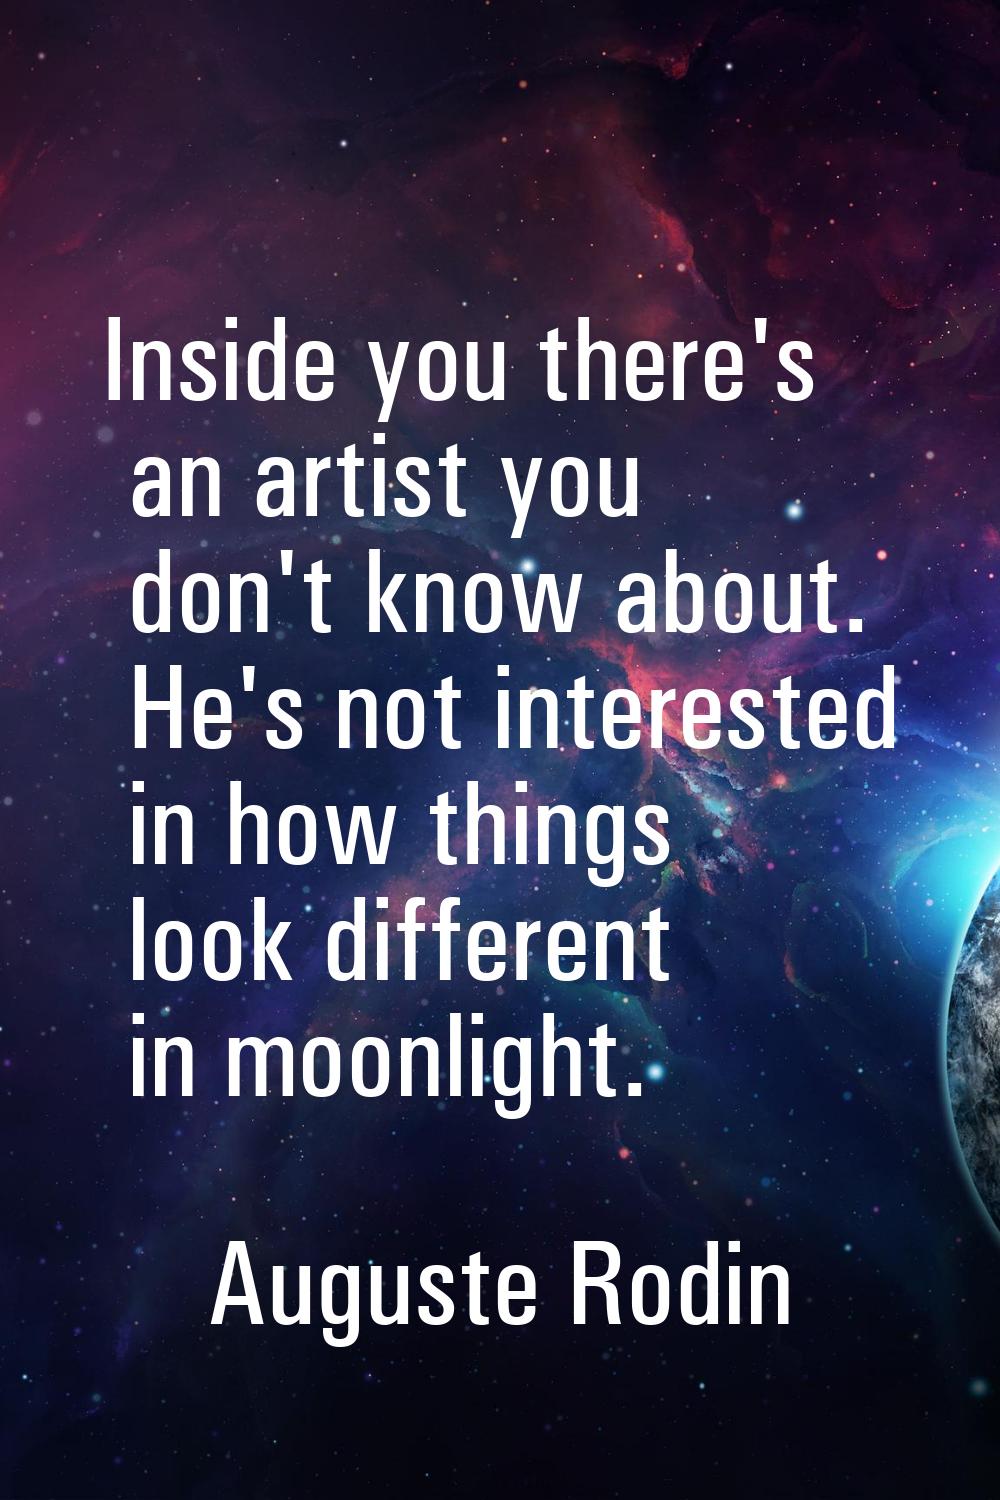 Inside you there's an artist you don't know about. He's not interested in how things look different